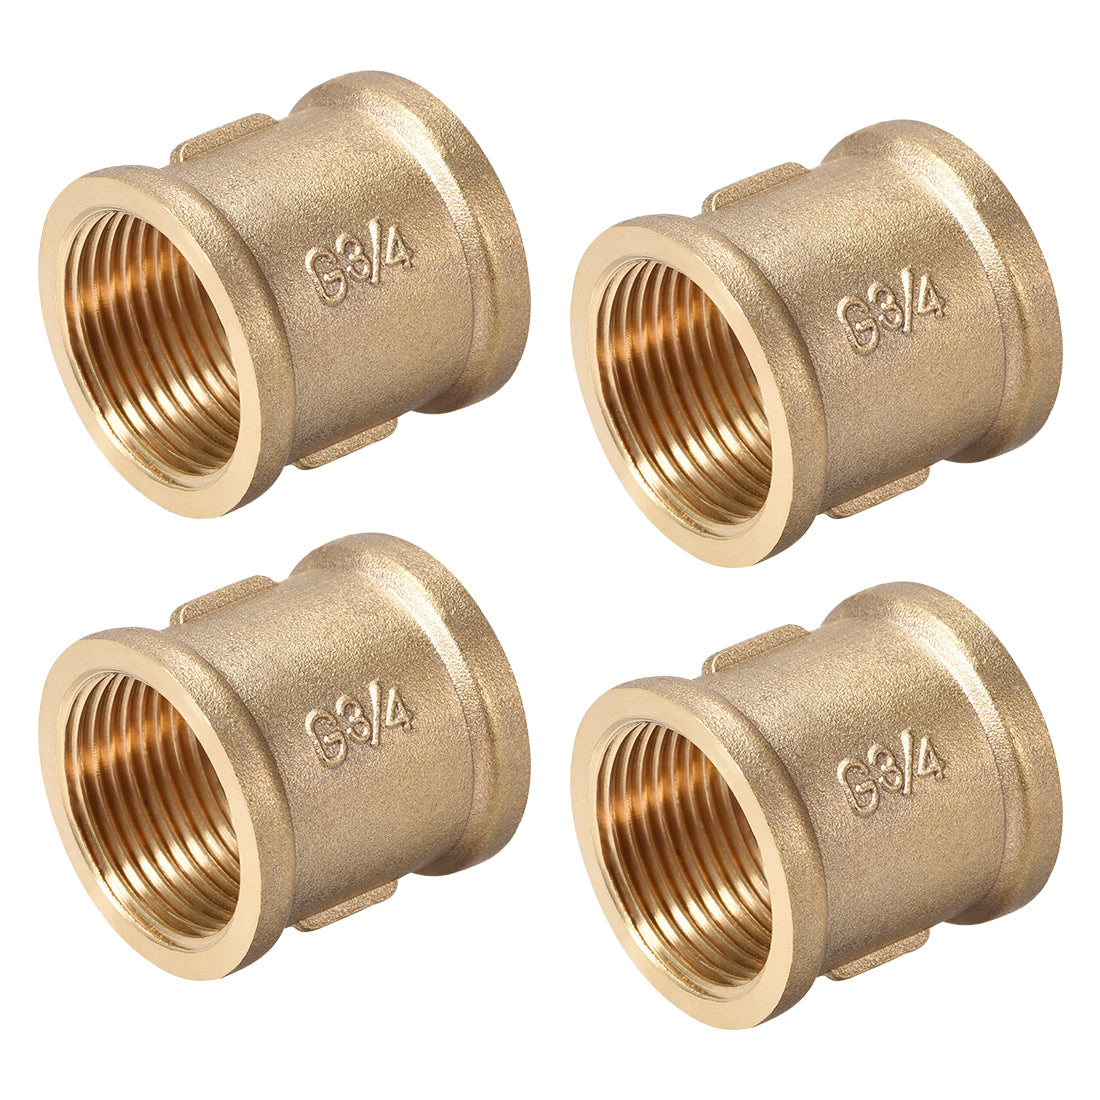 uxcell Uxcell Brass Cast Pipe Fittings Coupling 3/4 x 3/4 G Female Thread Gold Tone 4pcs